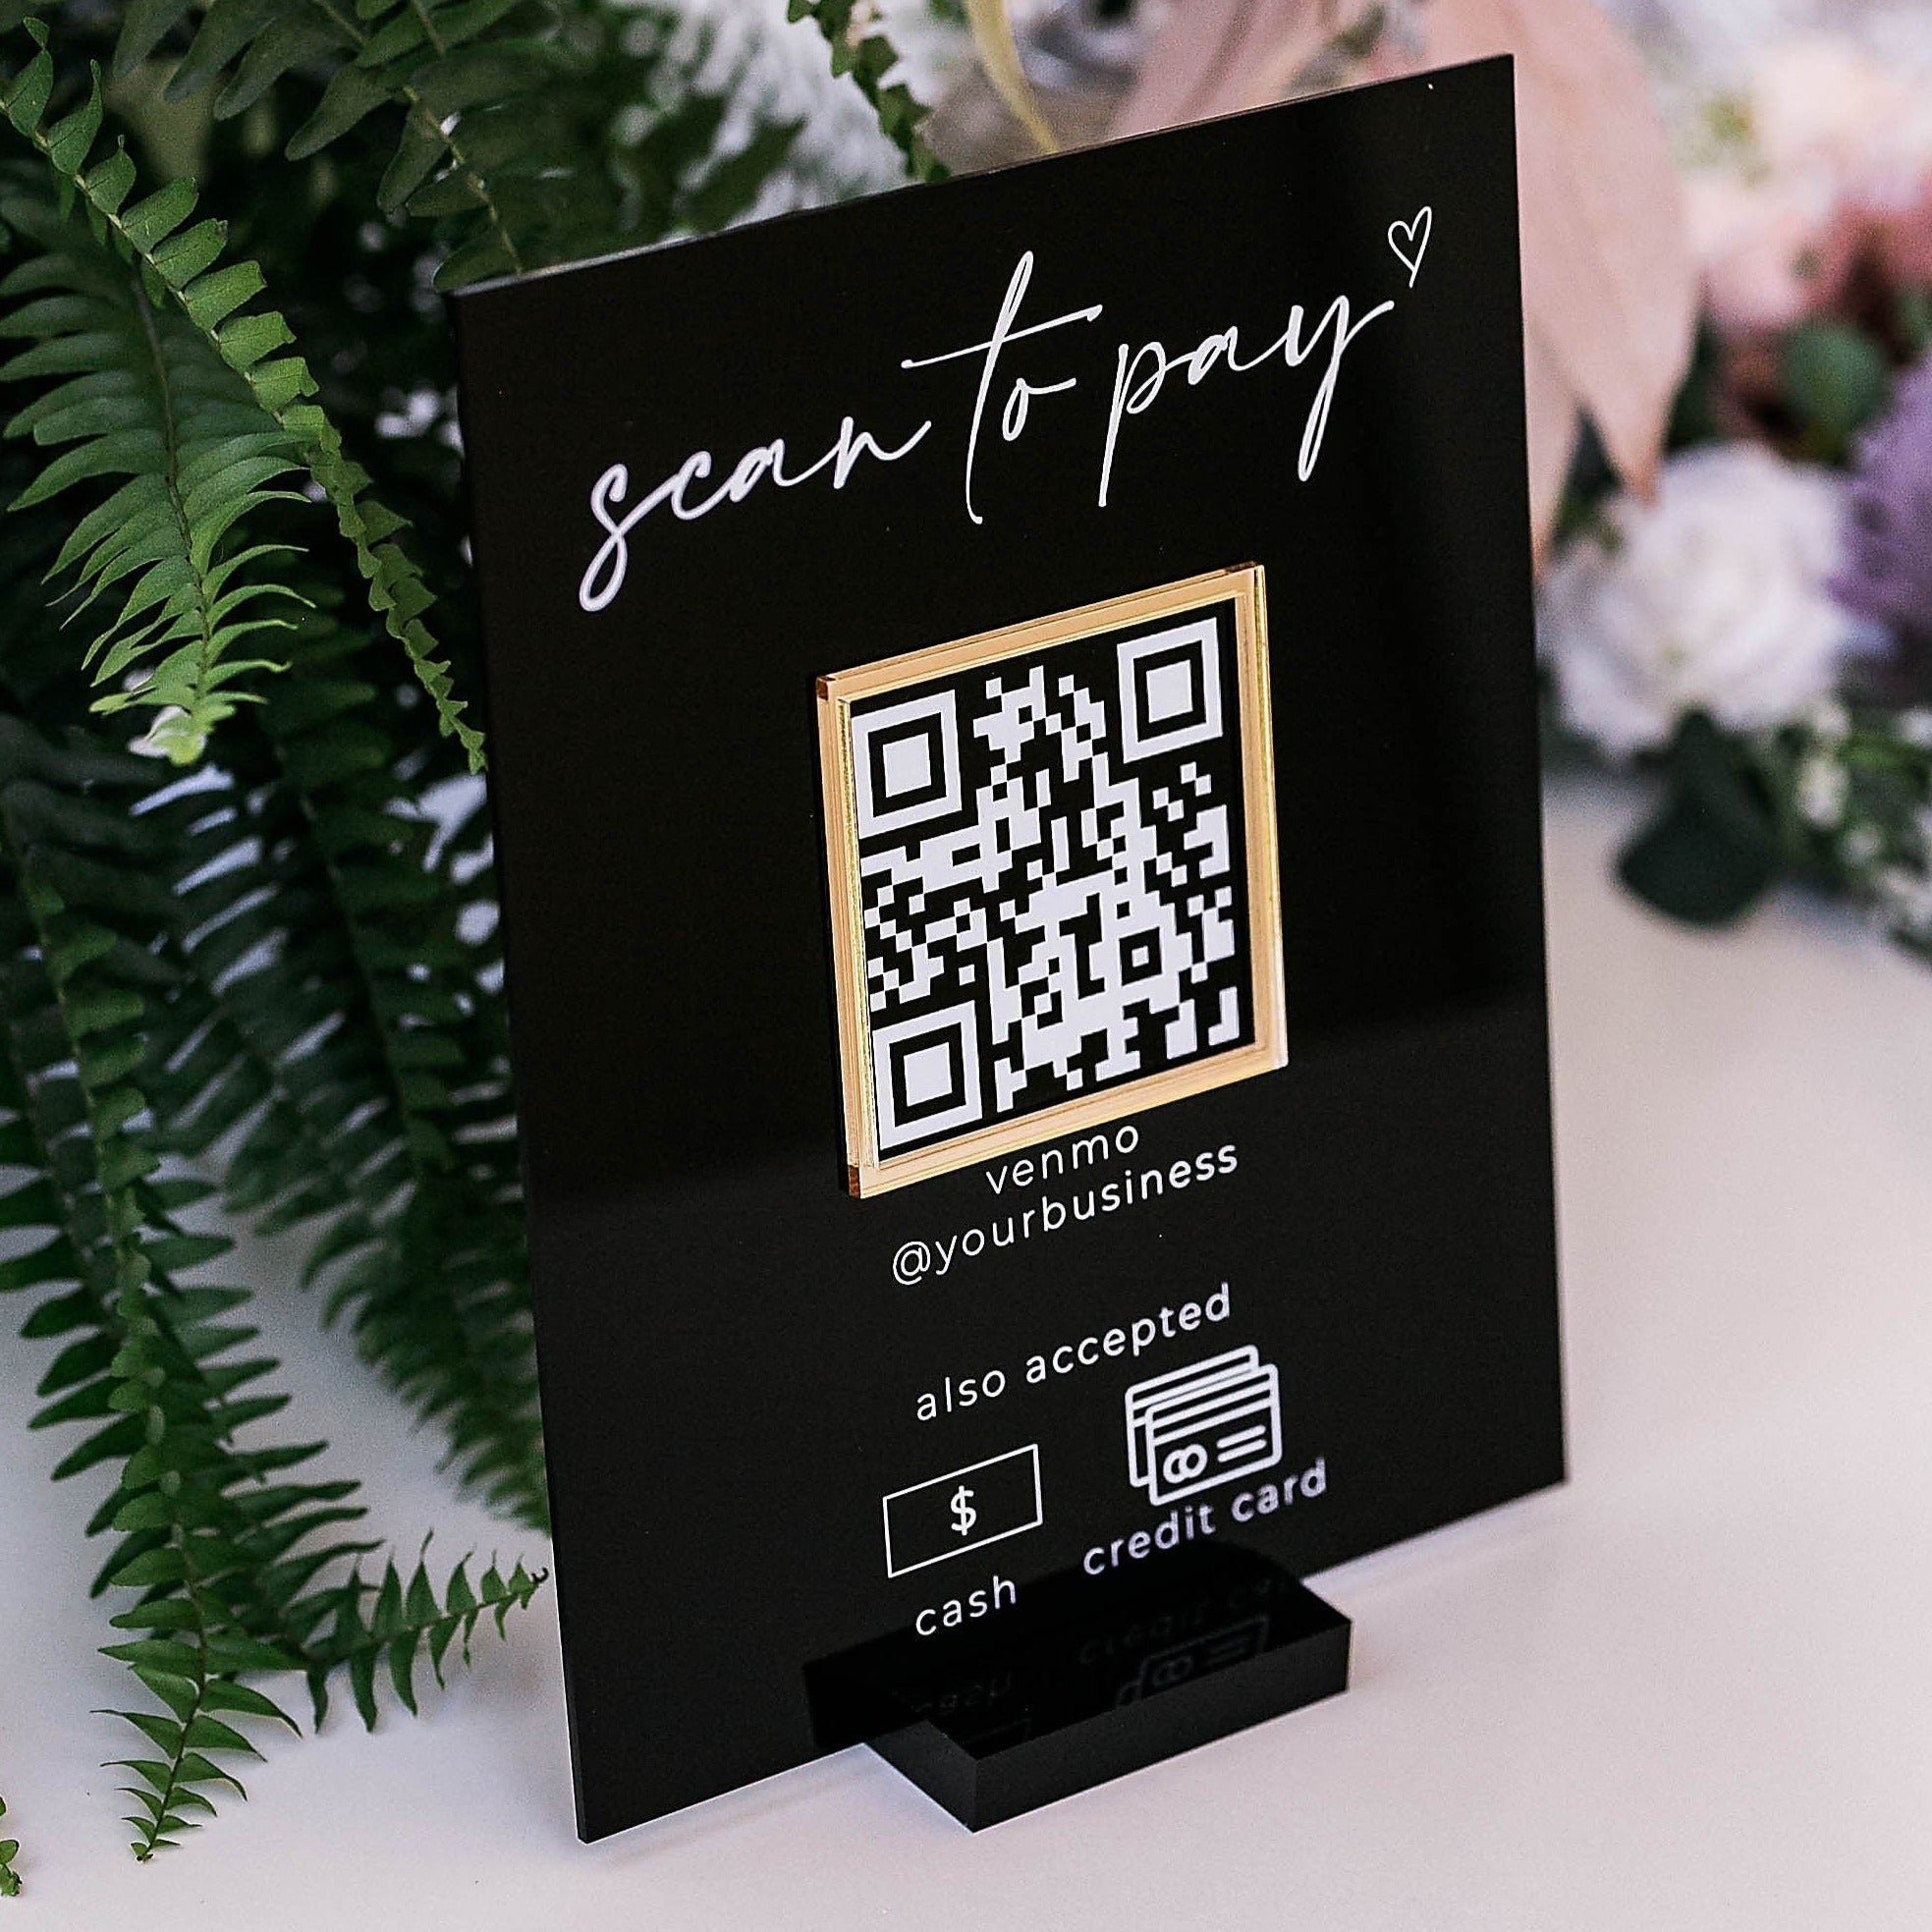 3D Scan To Pay QR Code 3DF11-AS2